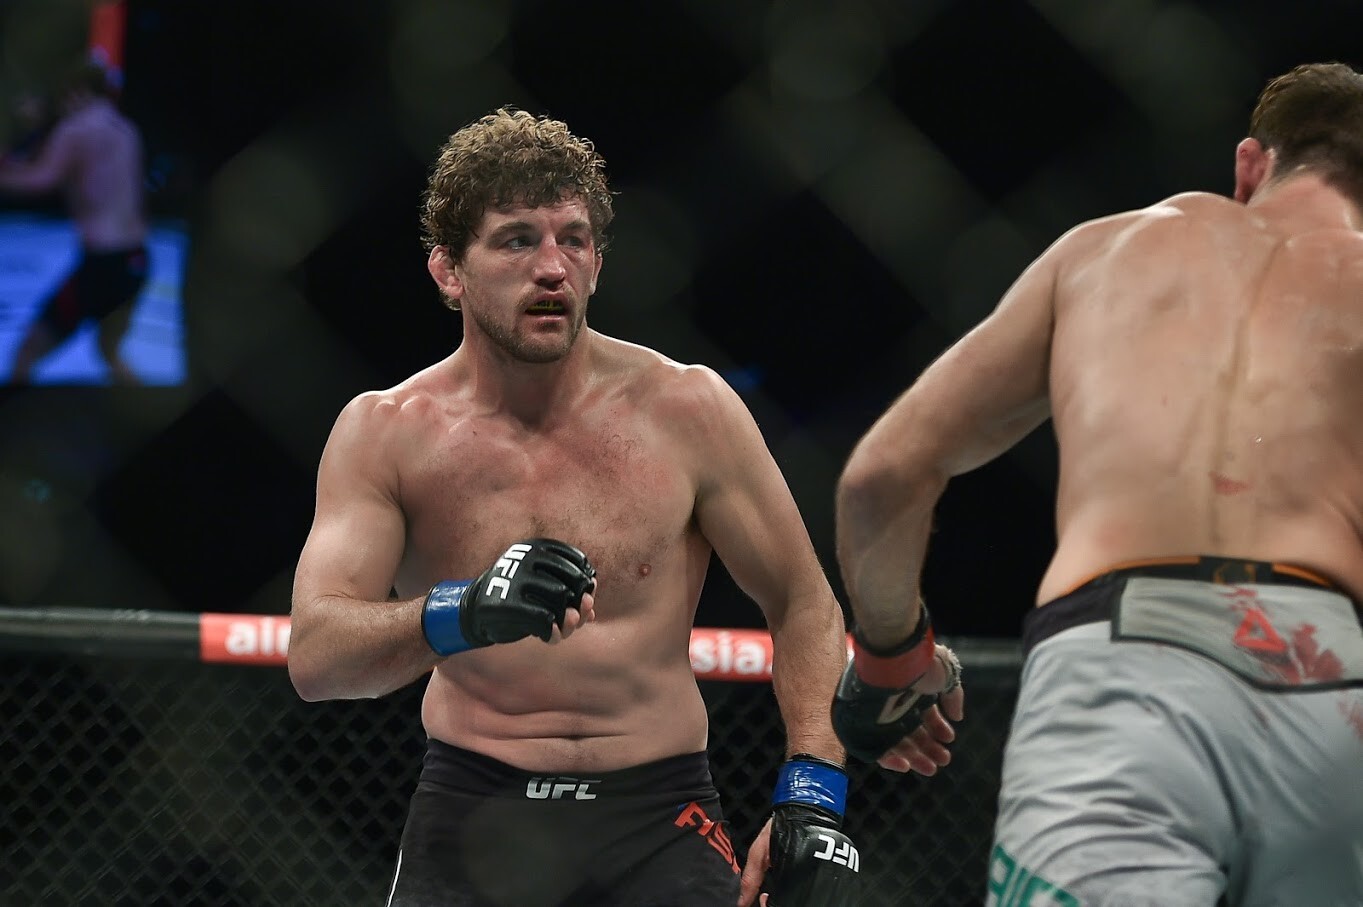 Retired MMA fighter Ben Askren during his fight against Demian Maia at UFC Fight Night in Singapore in October 2019. Photo: Handout